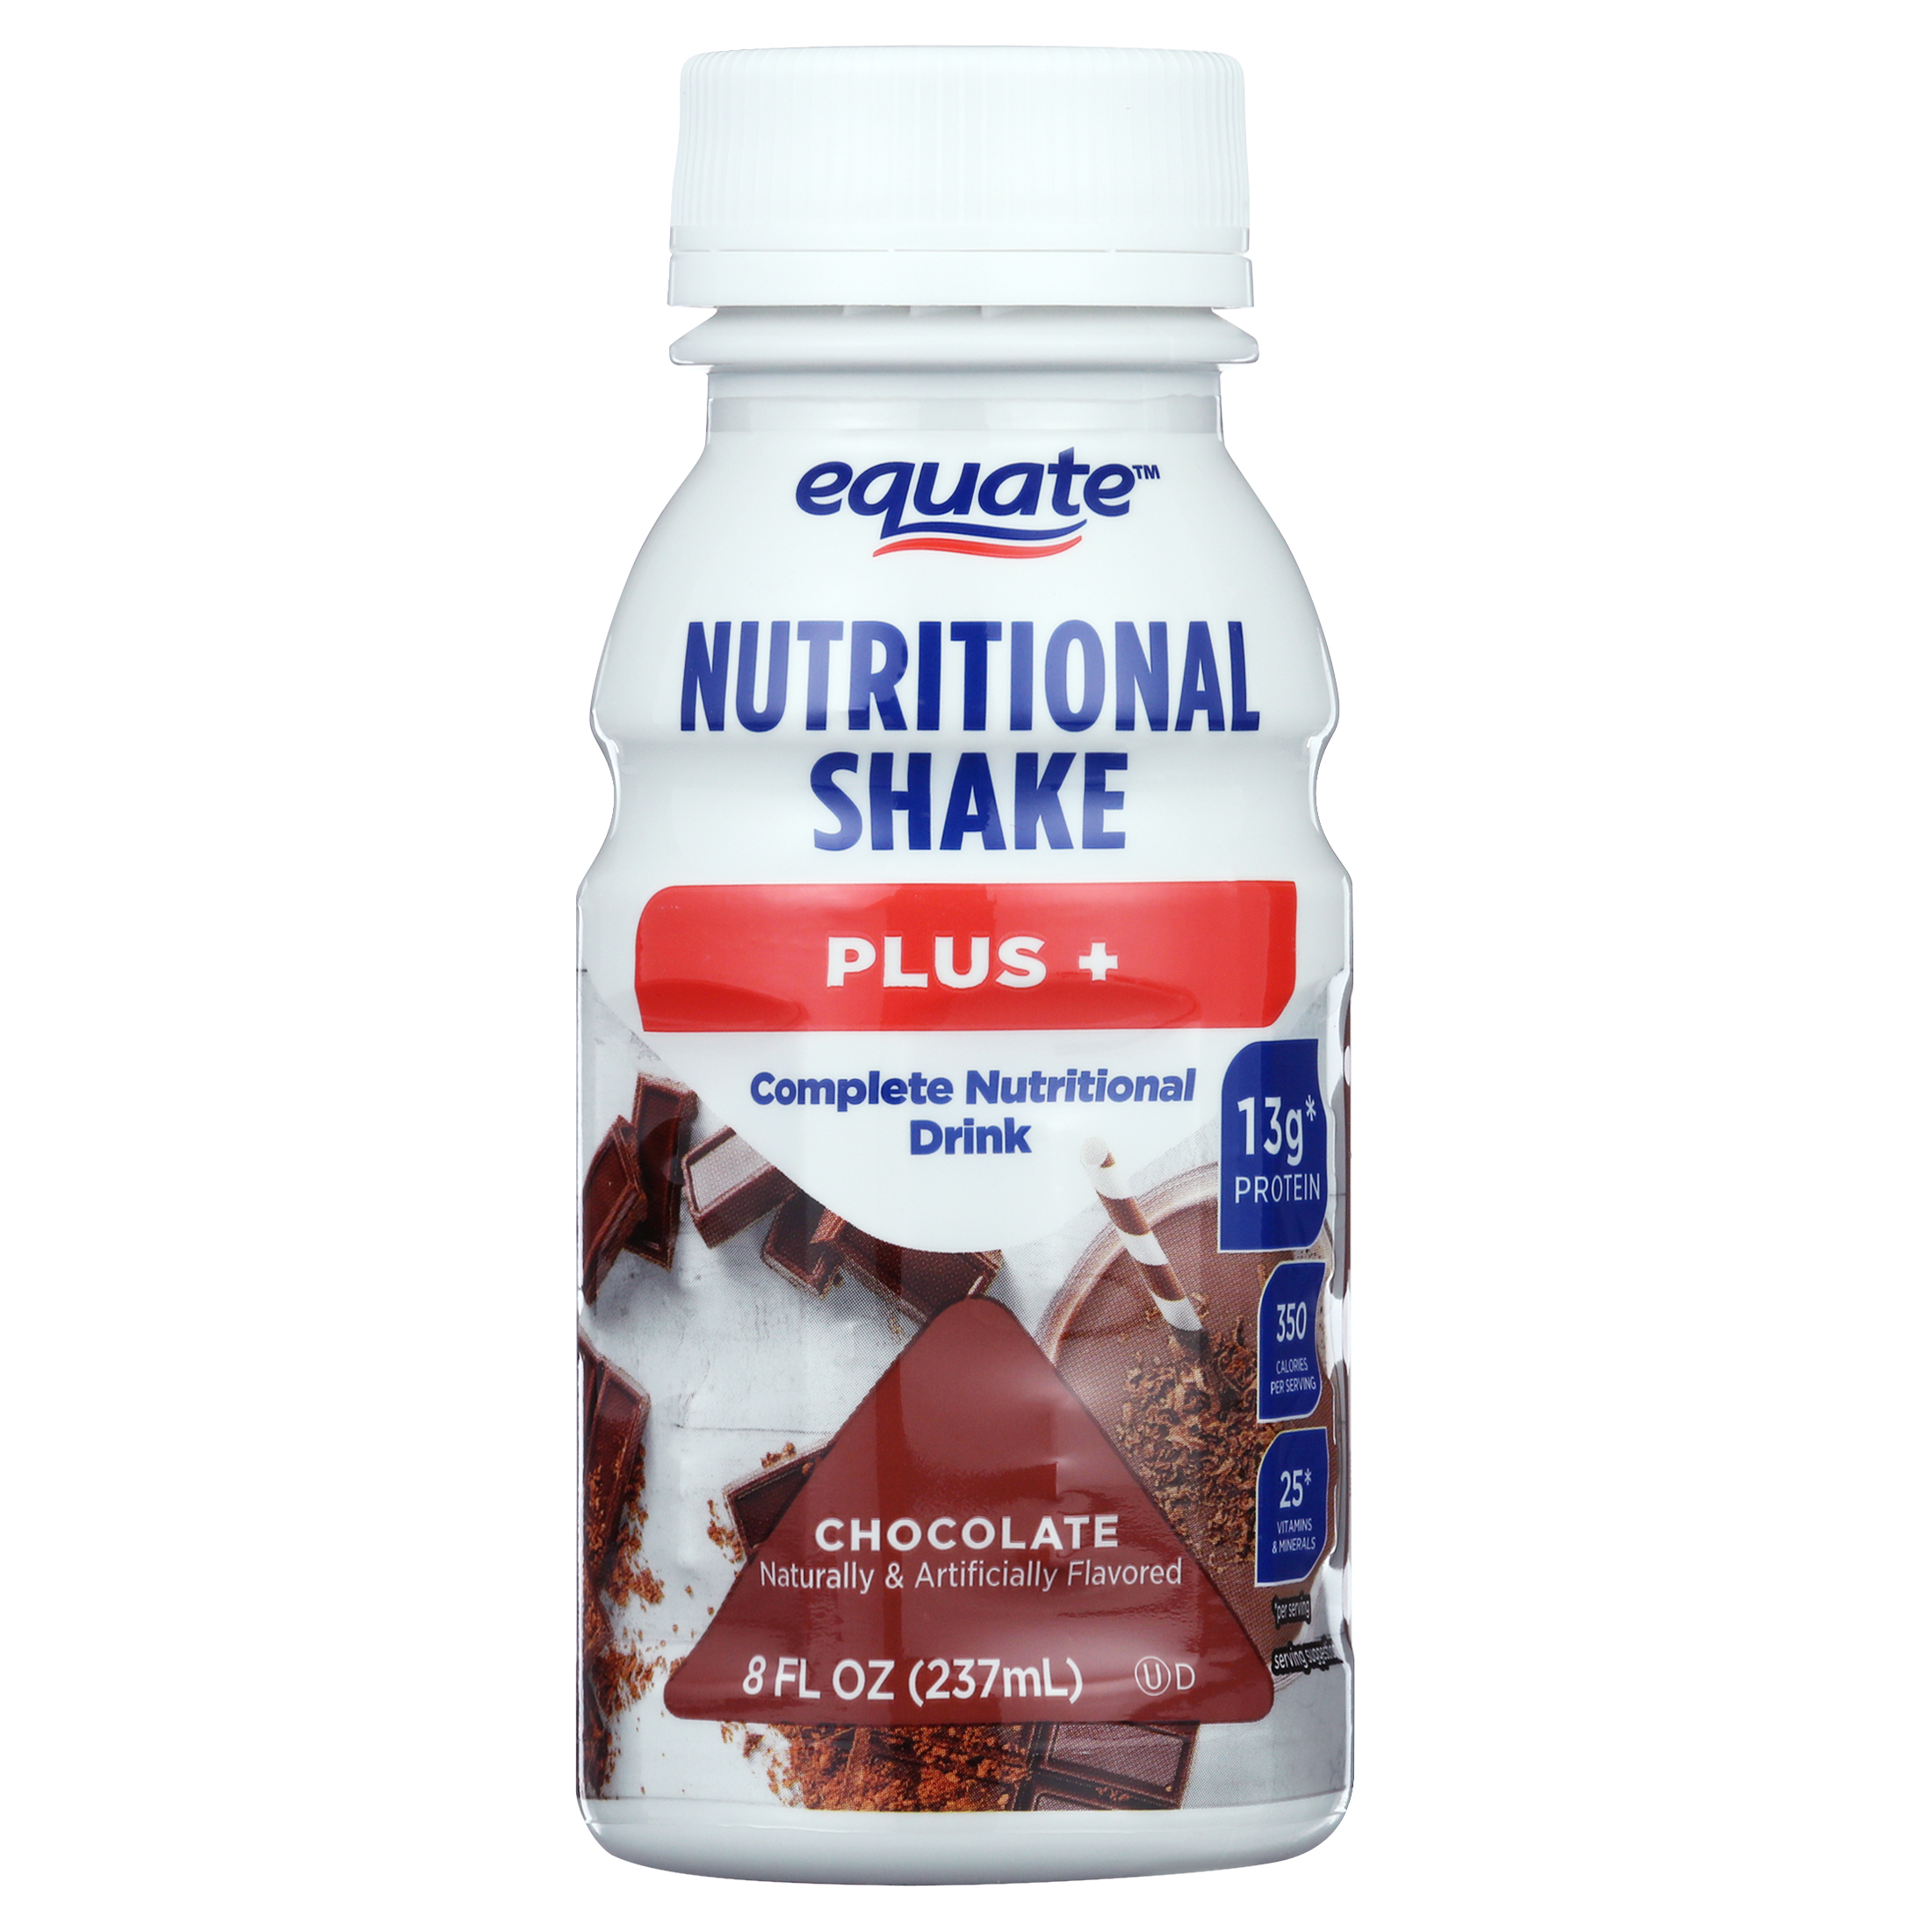 Equate Nutritional Shake Plus, Chocolate, 8 fl oz, 6 Count - image 5 of 10